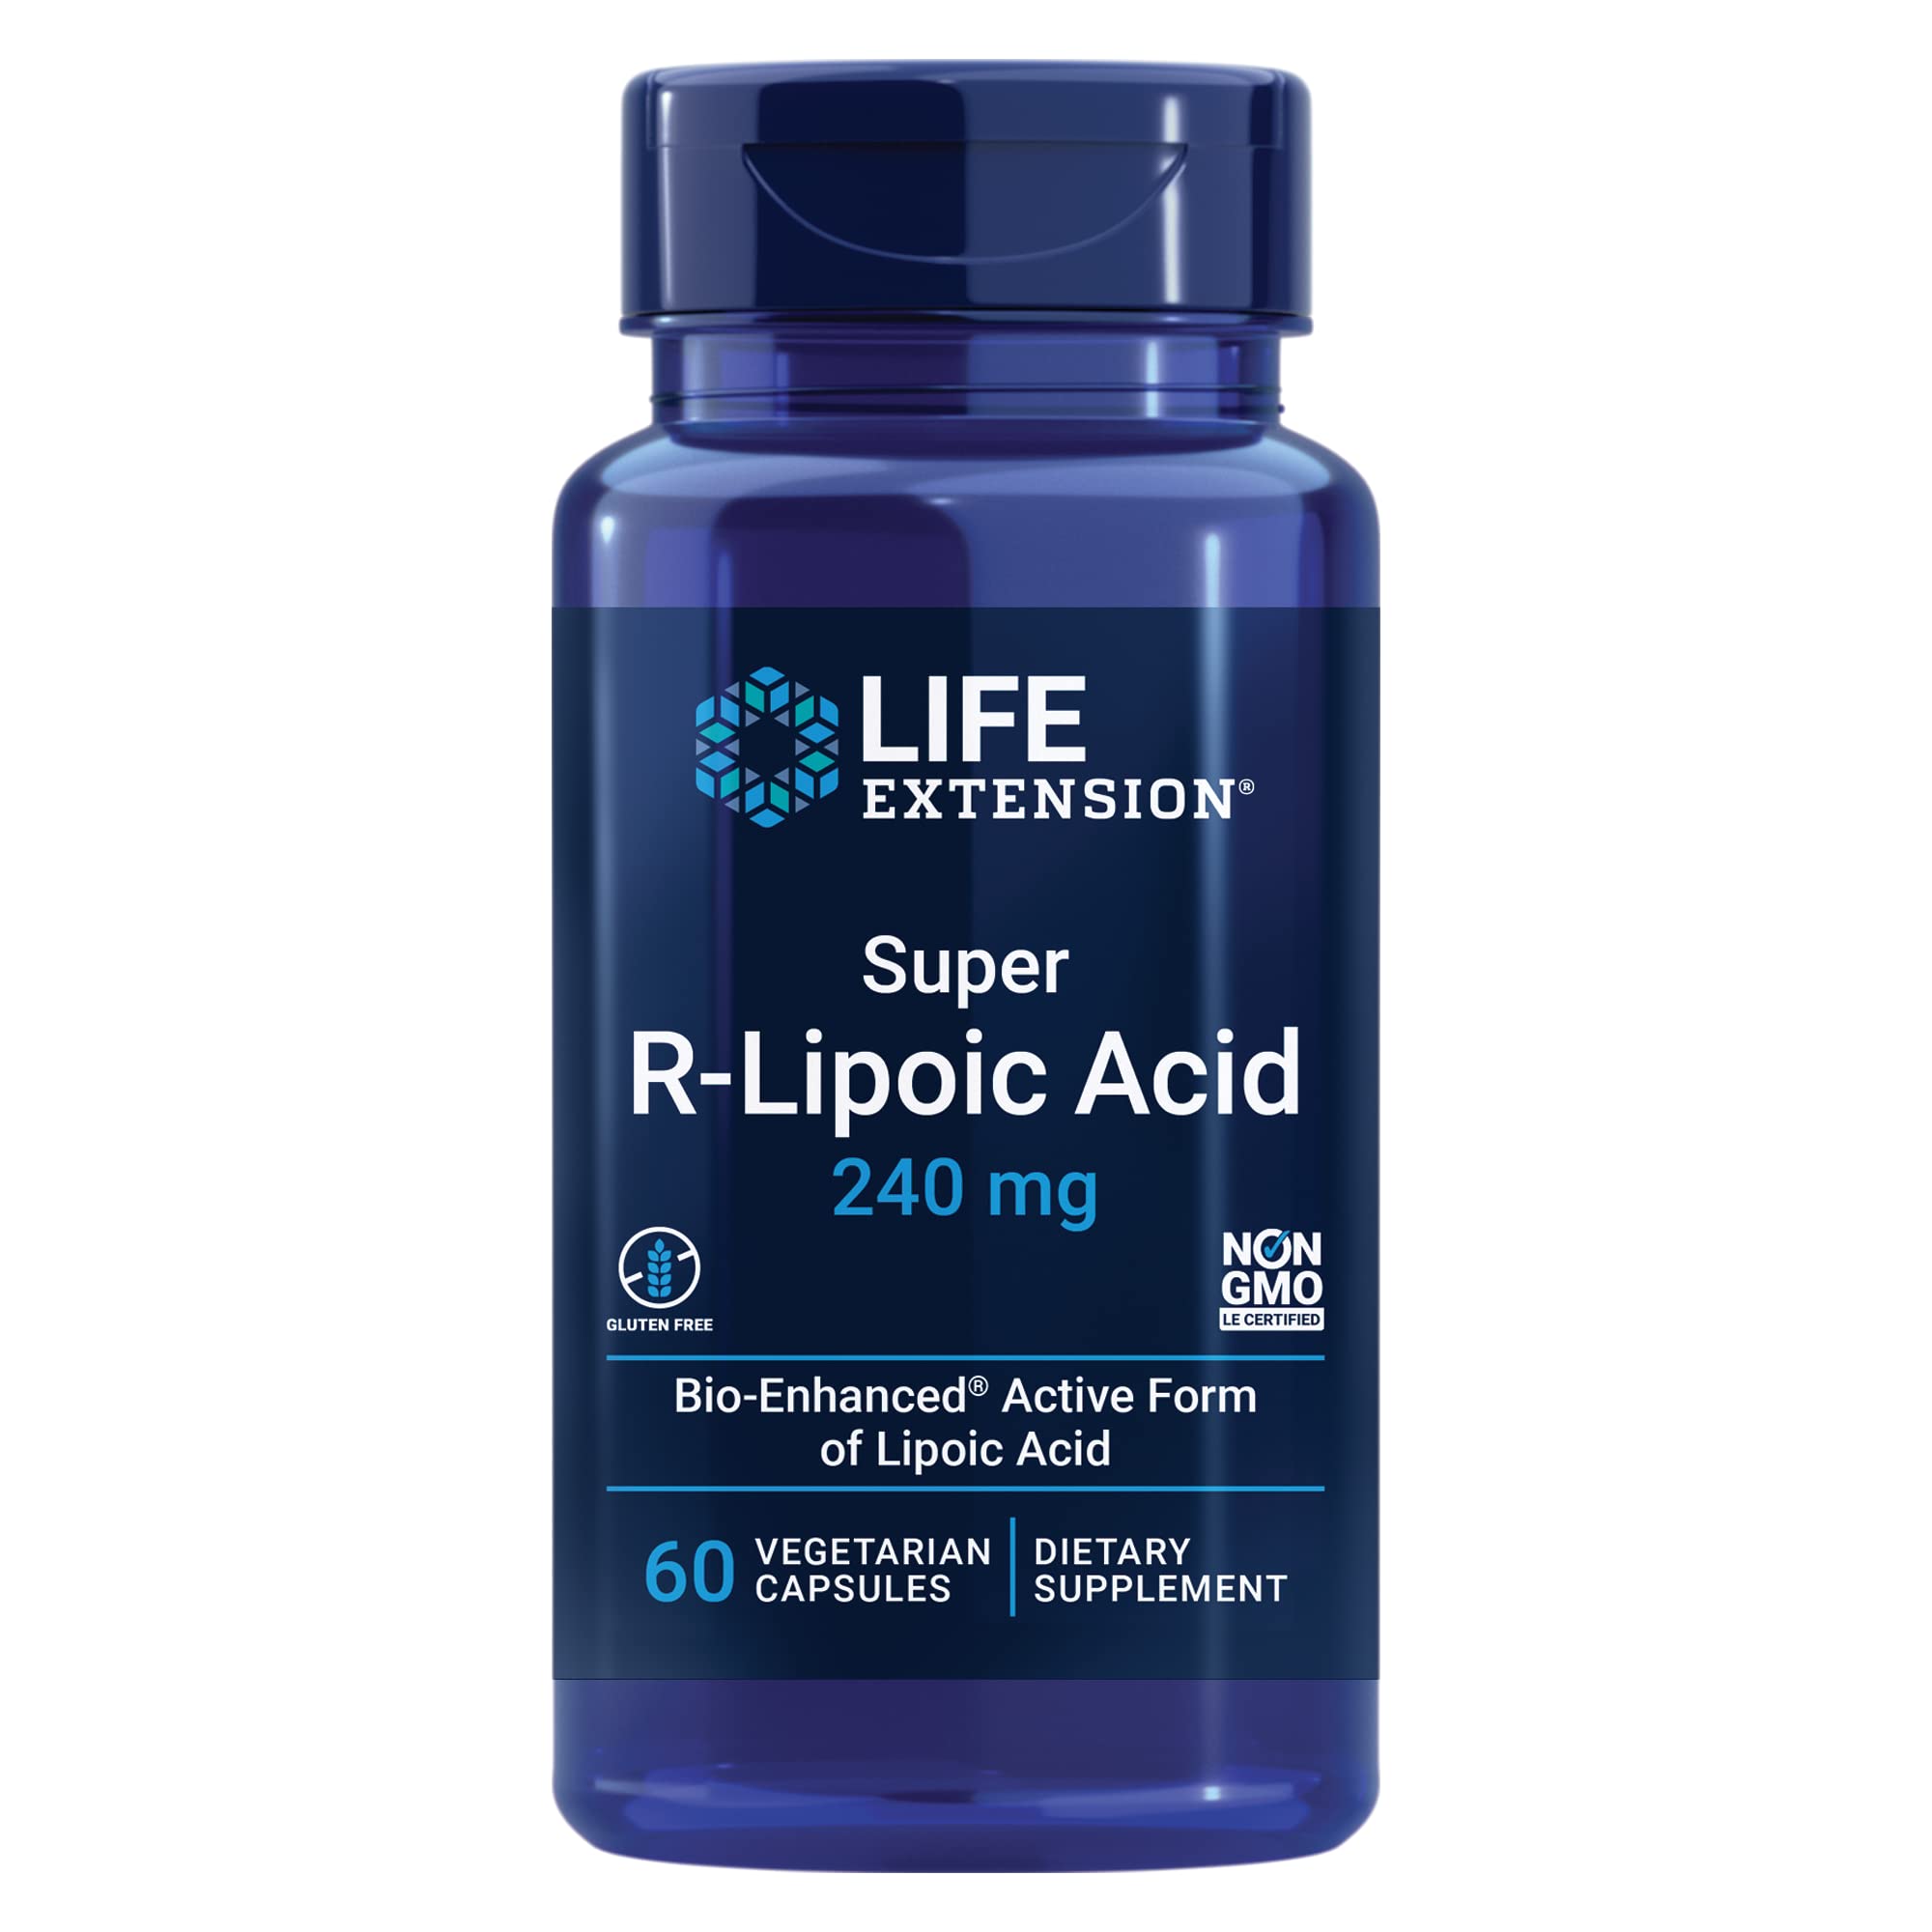 Book Cover Life Extension Super R-Lipoic Acid 240 mg - Supports Cellular Energy - Supplement for Anti-Aging and Liver Health - Non-GMO, Gluten-Free - 60 Vegetarian Capsules 60.0 Servings (Pack of 1)